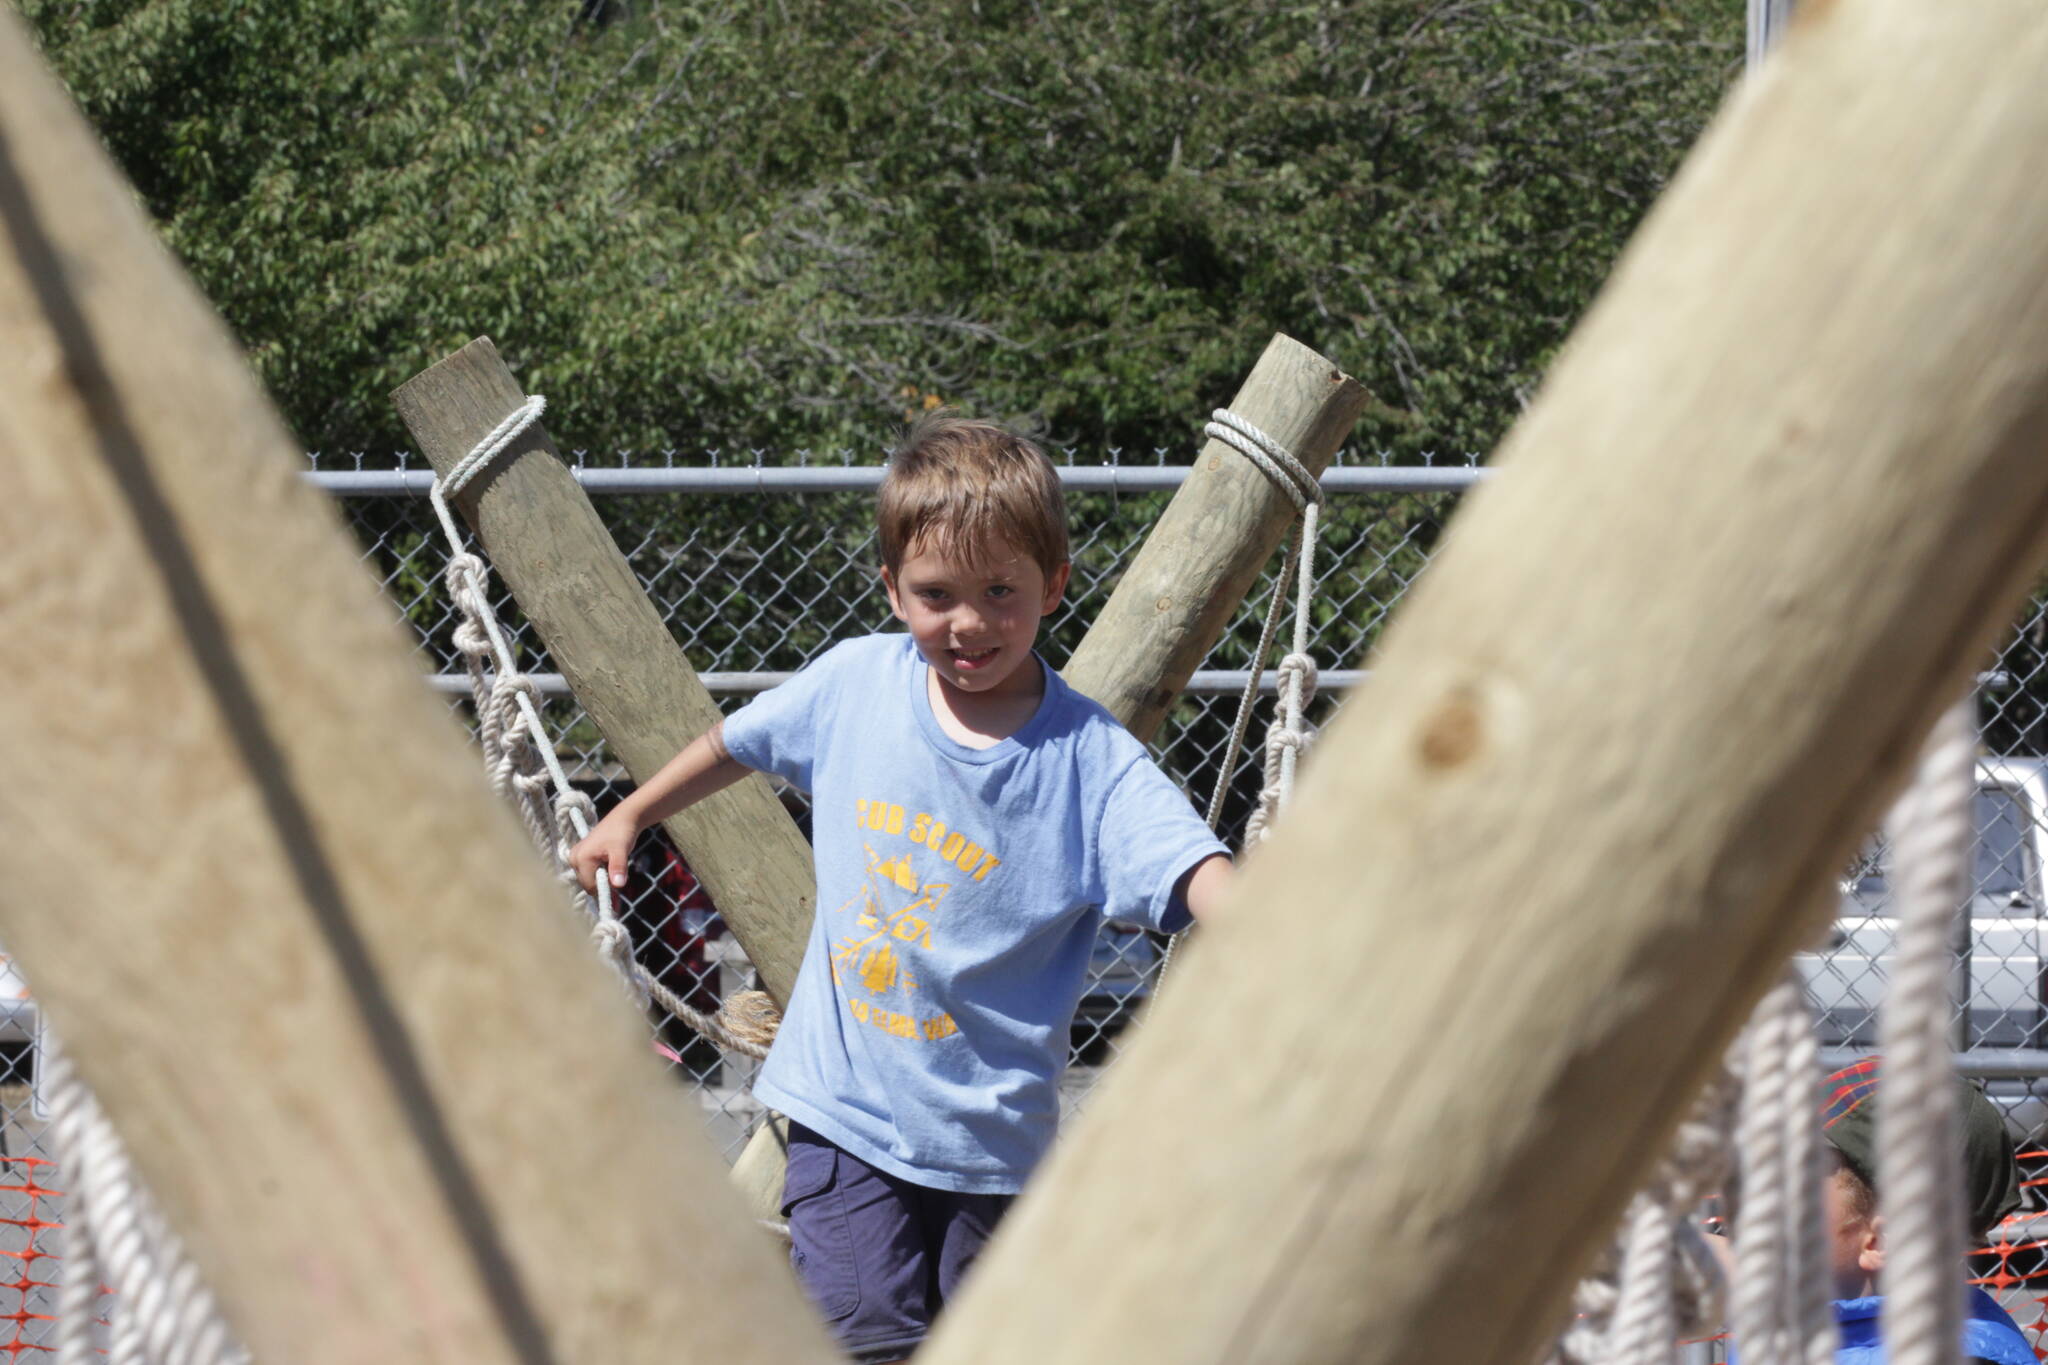 Cub Scout Jaxon Astry crosses a monkey bridge set up by the Scouts during the Grays Harbor County State Fair. (Michael S. Lockett / The Daily World)